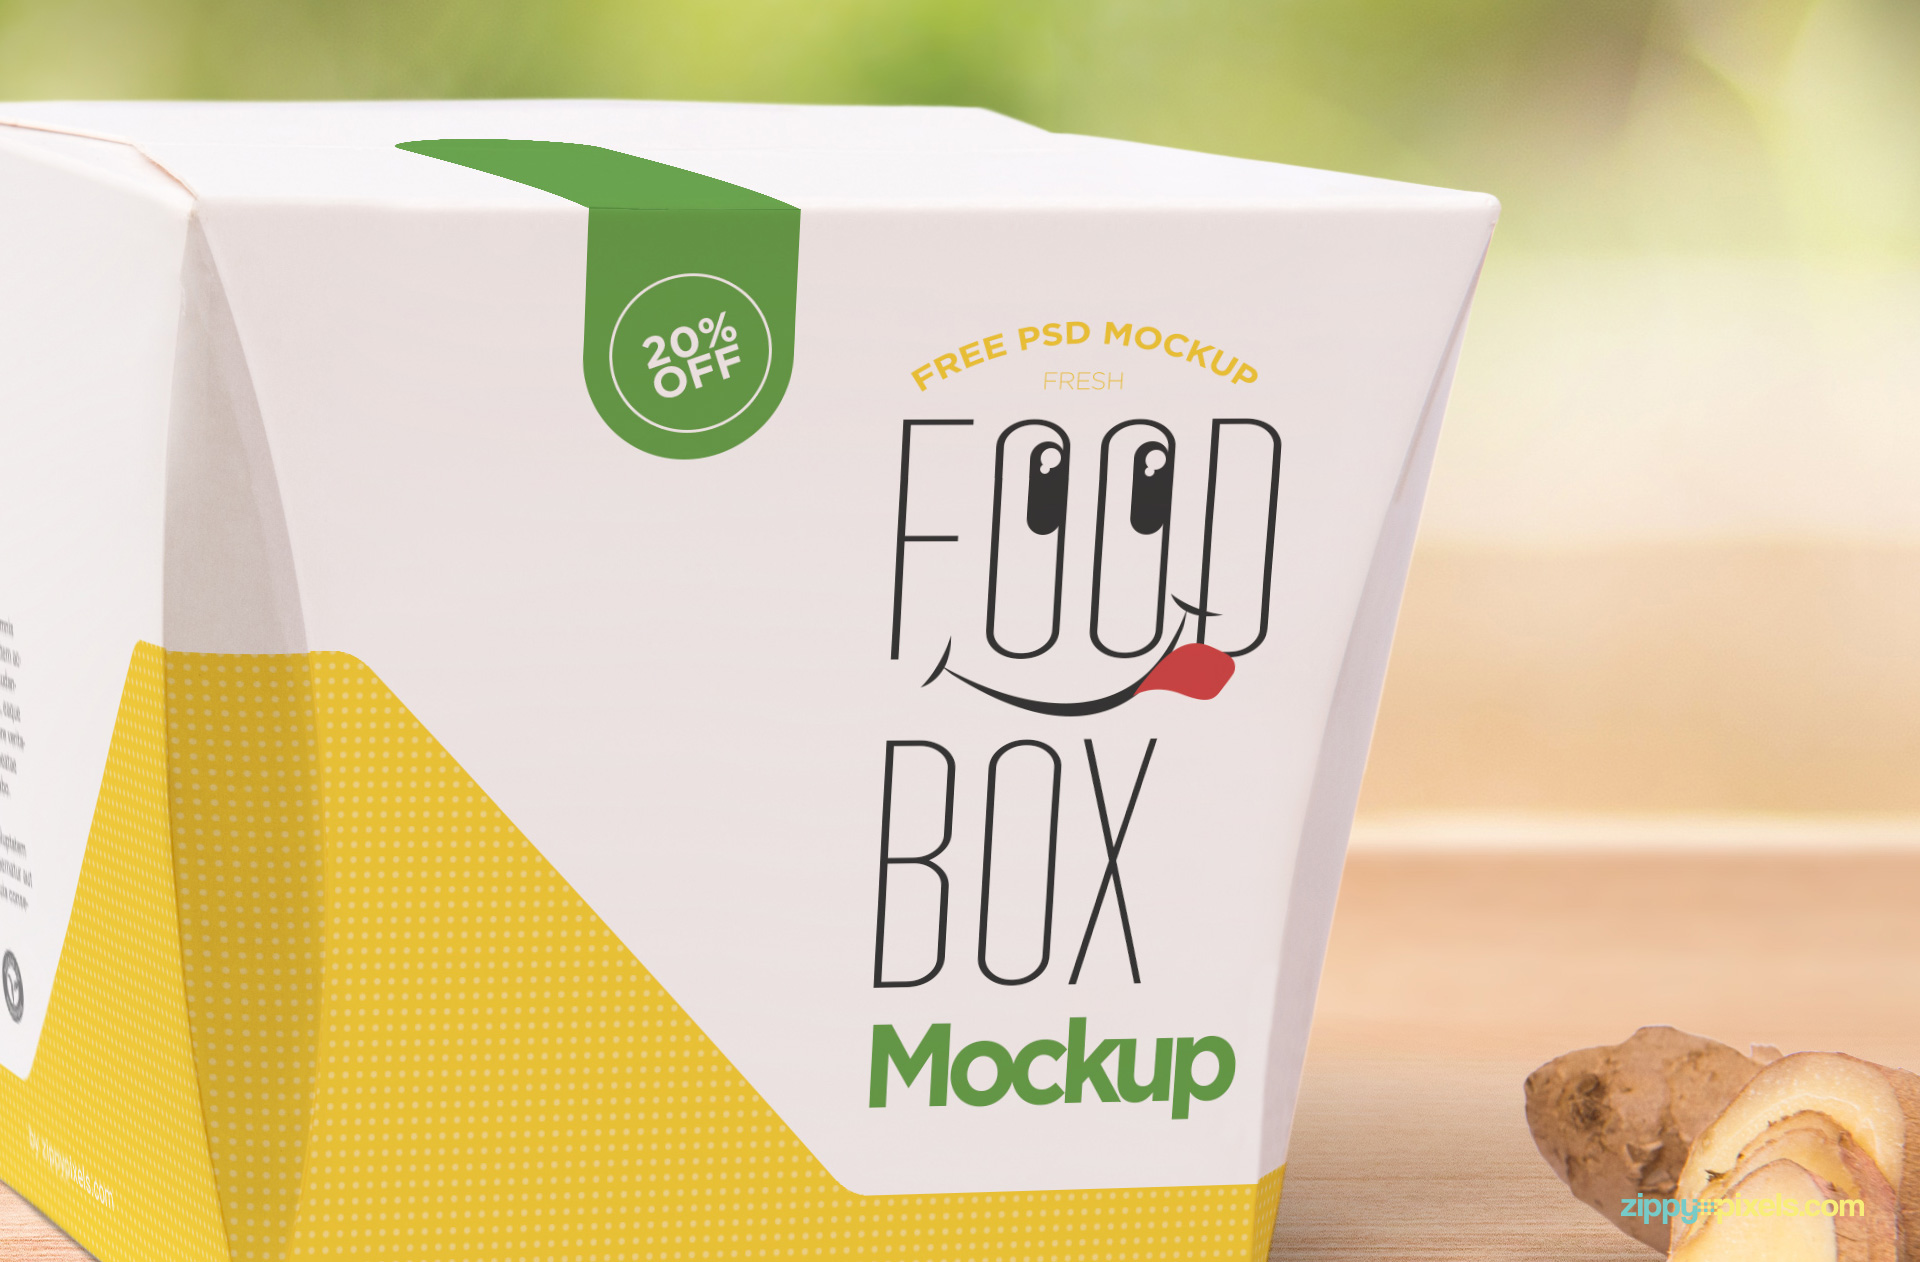 Zoom in view of the lunch box mockup.